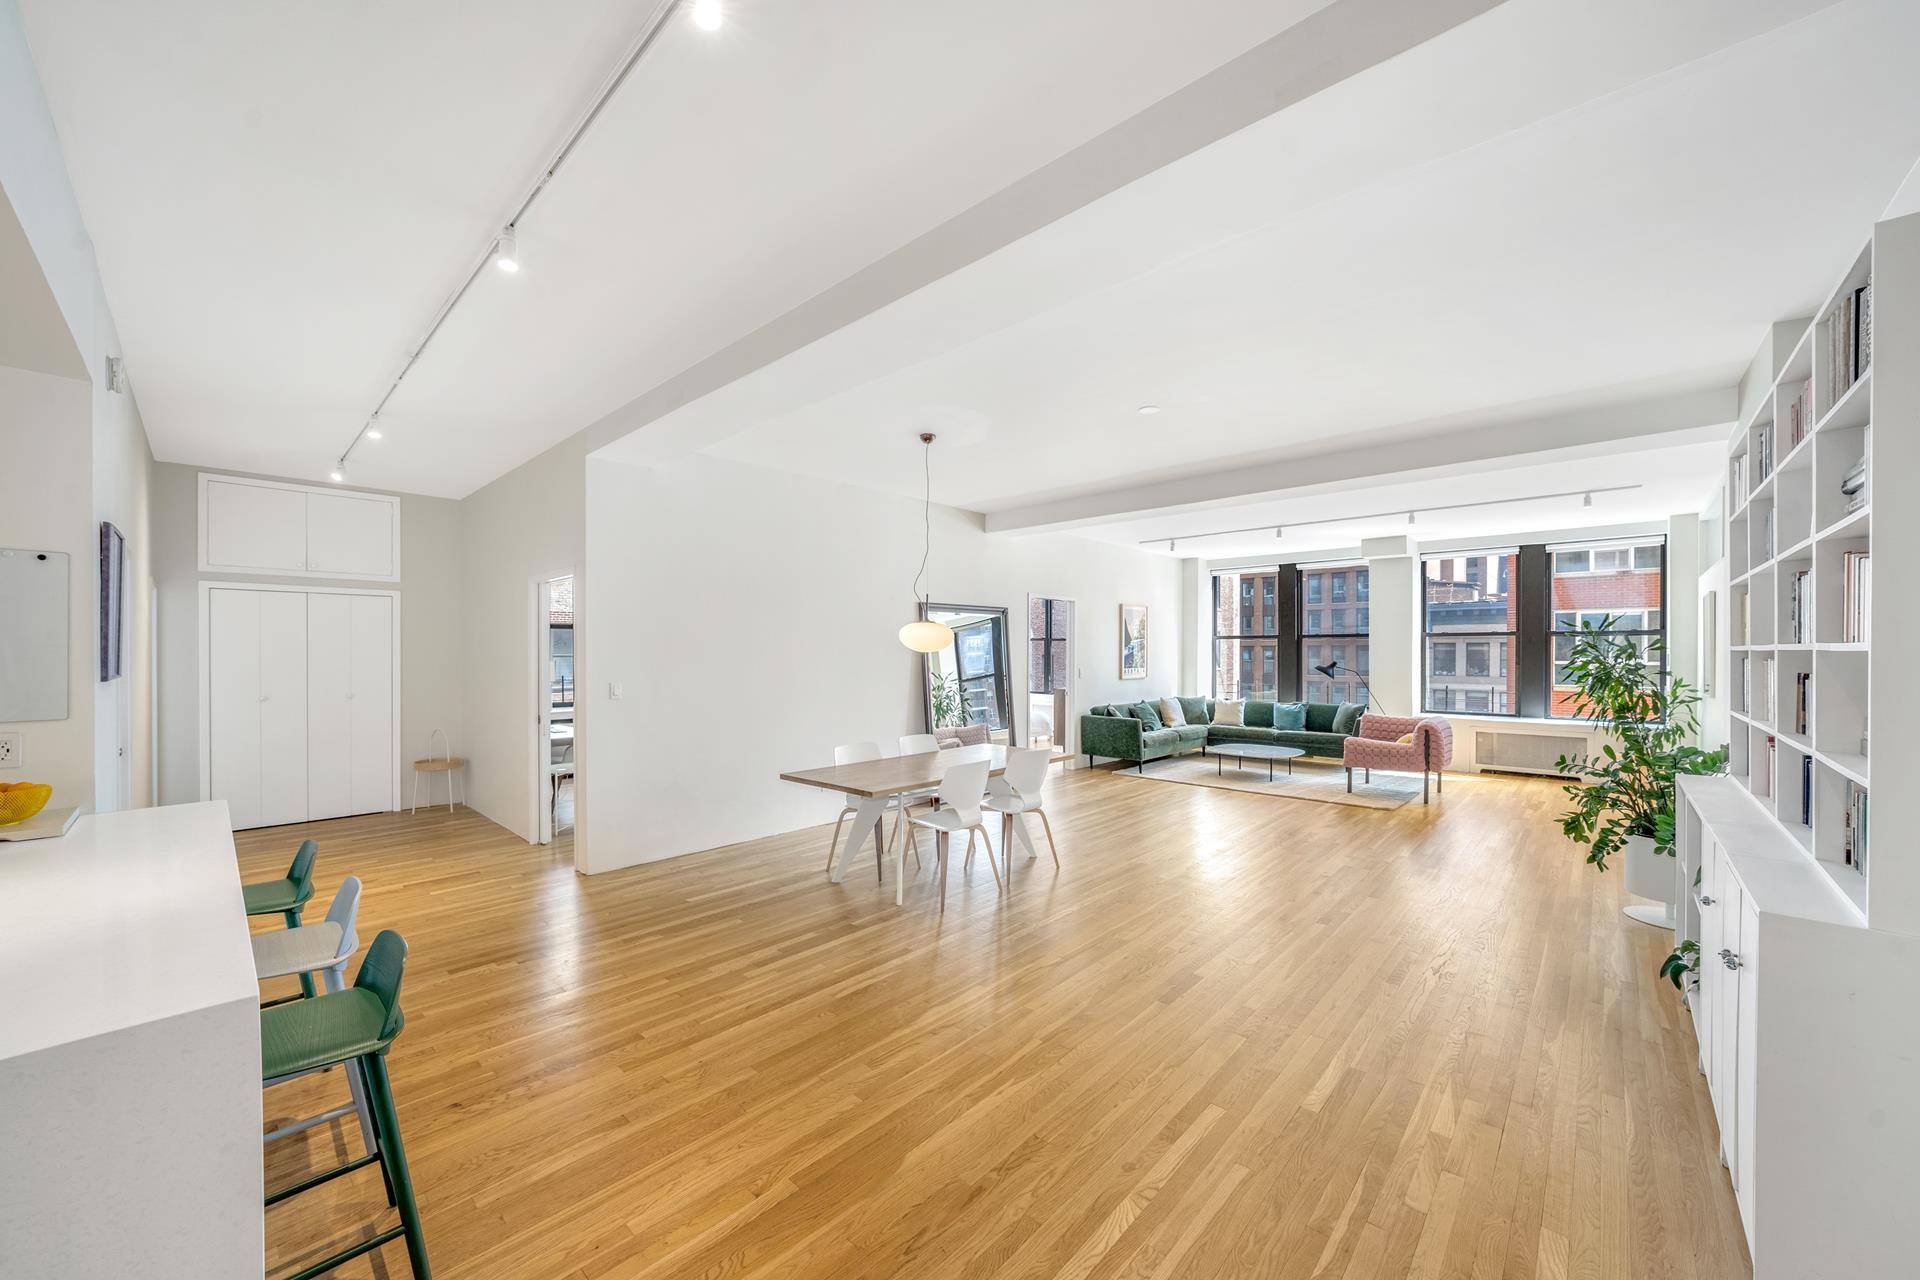 Apartment 6B is an exceptional live work corner loft graced with a profusion of natural light pouring through 17 large windows and a south facing living room that stretches a ...